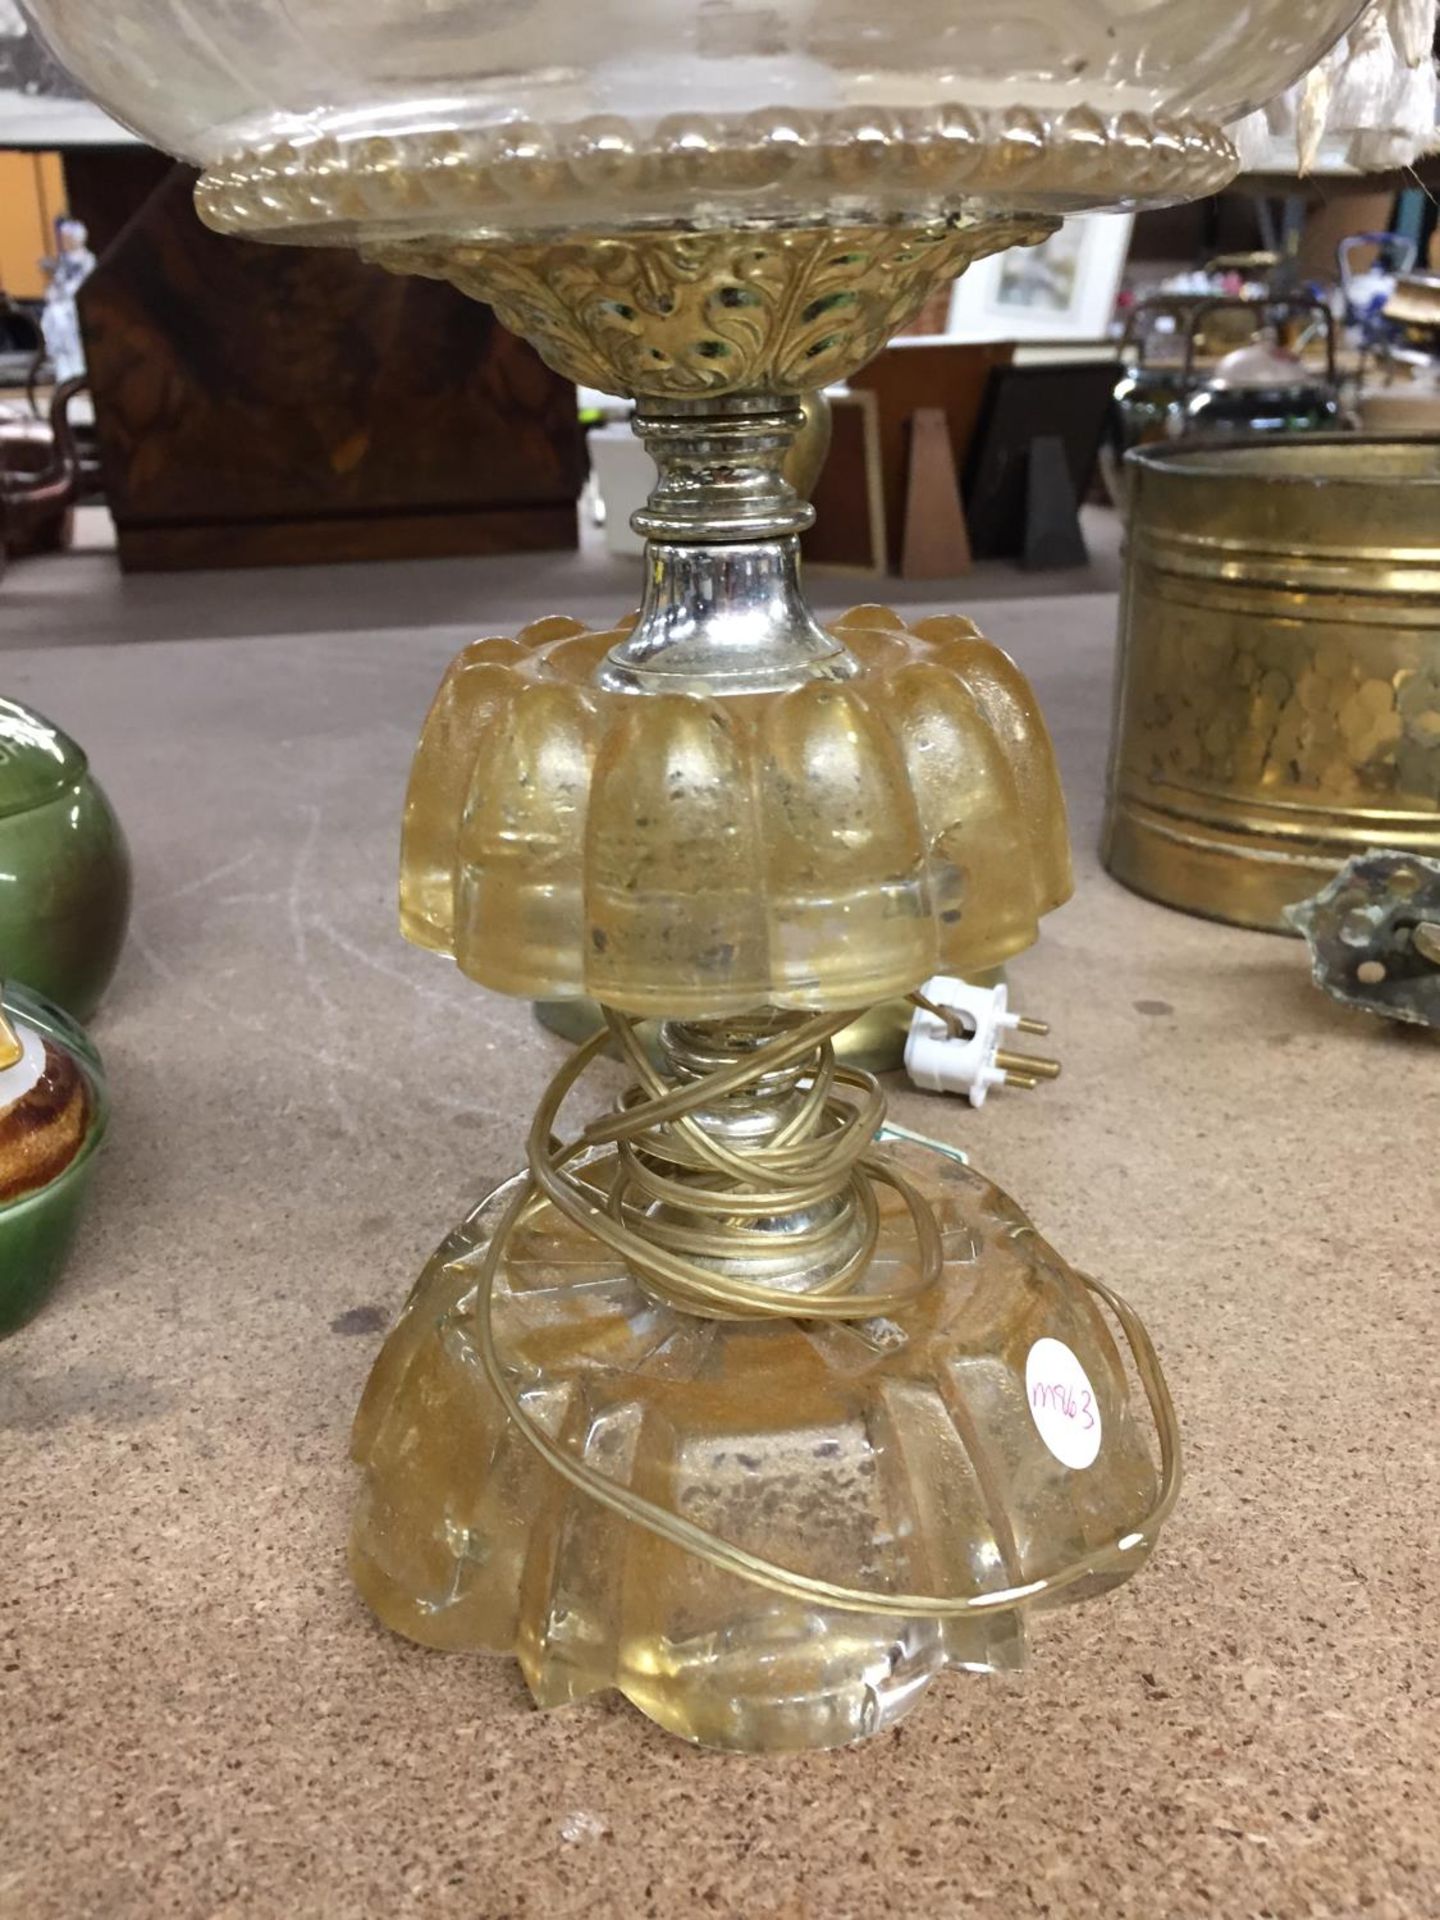 TWO TABLE LAMPS, ONE BRASS, THE OTHER IN THE STYLE OF AN OIL LAMP - Image 2 of 3